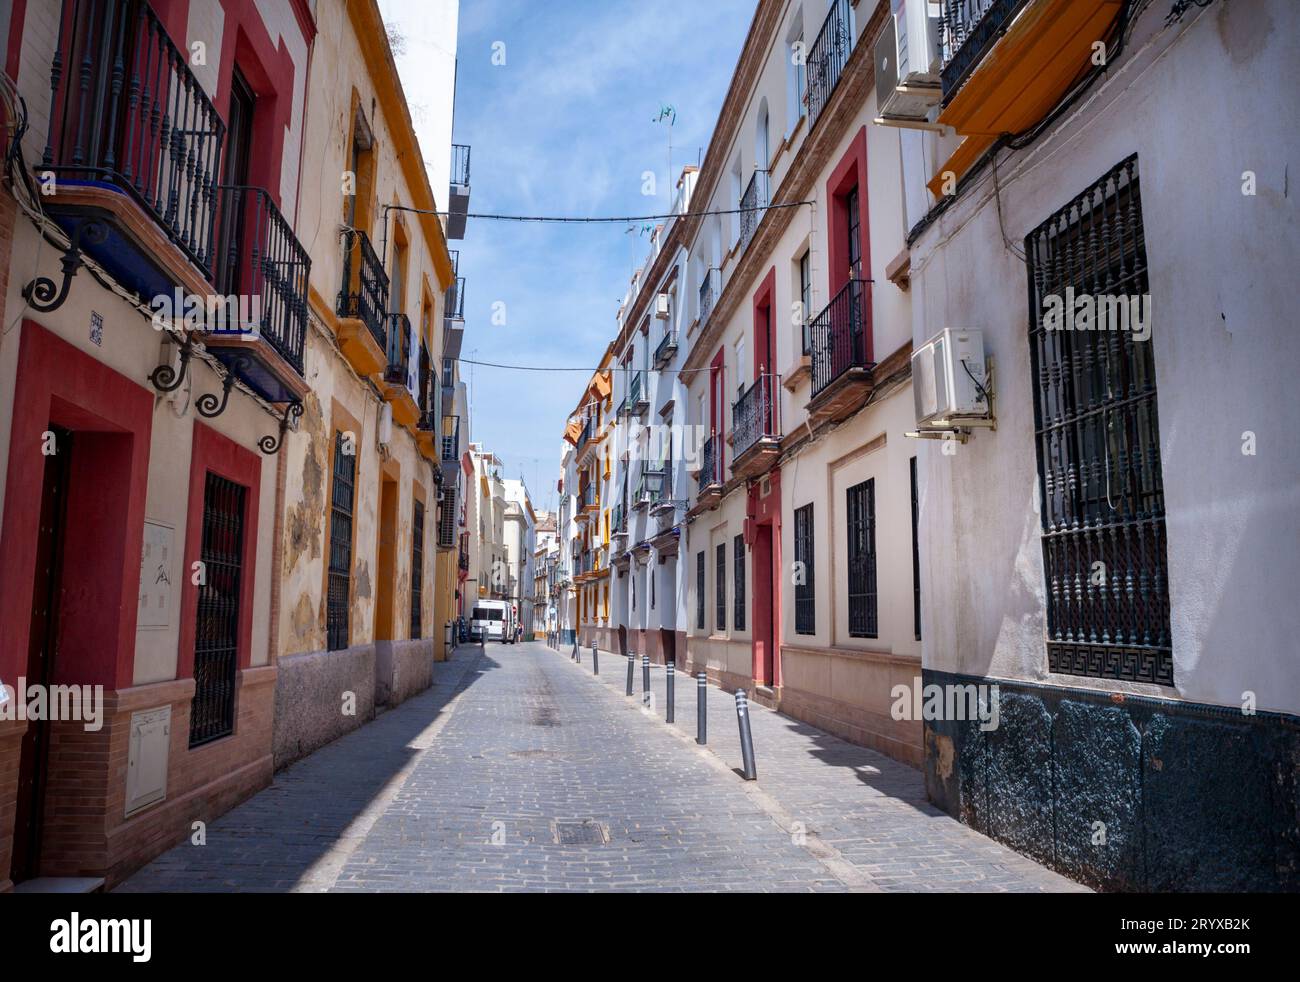 Seville Spain, Wide Angle View, Street Scene, Apartment Buildings, in Old Town Center, Stock Photo